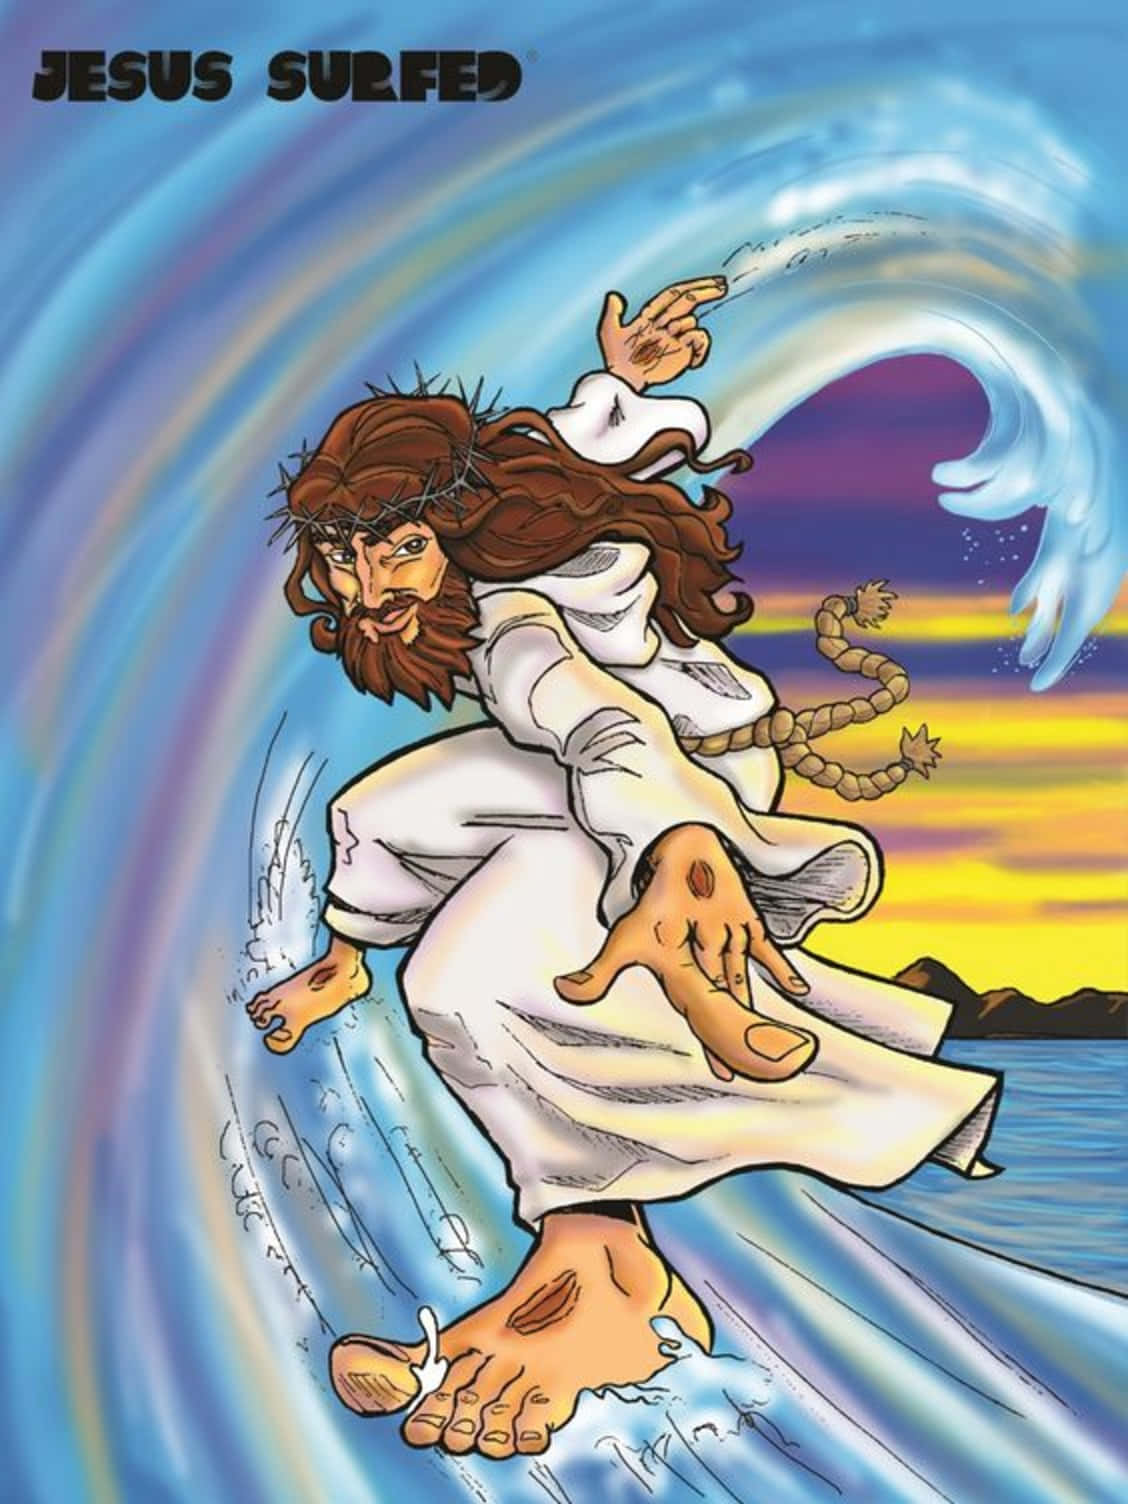 Cool Jesus Uses His Superpowers For Good Background